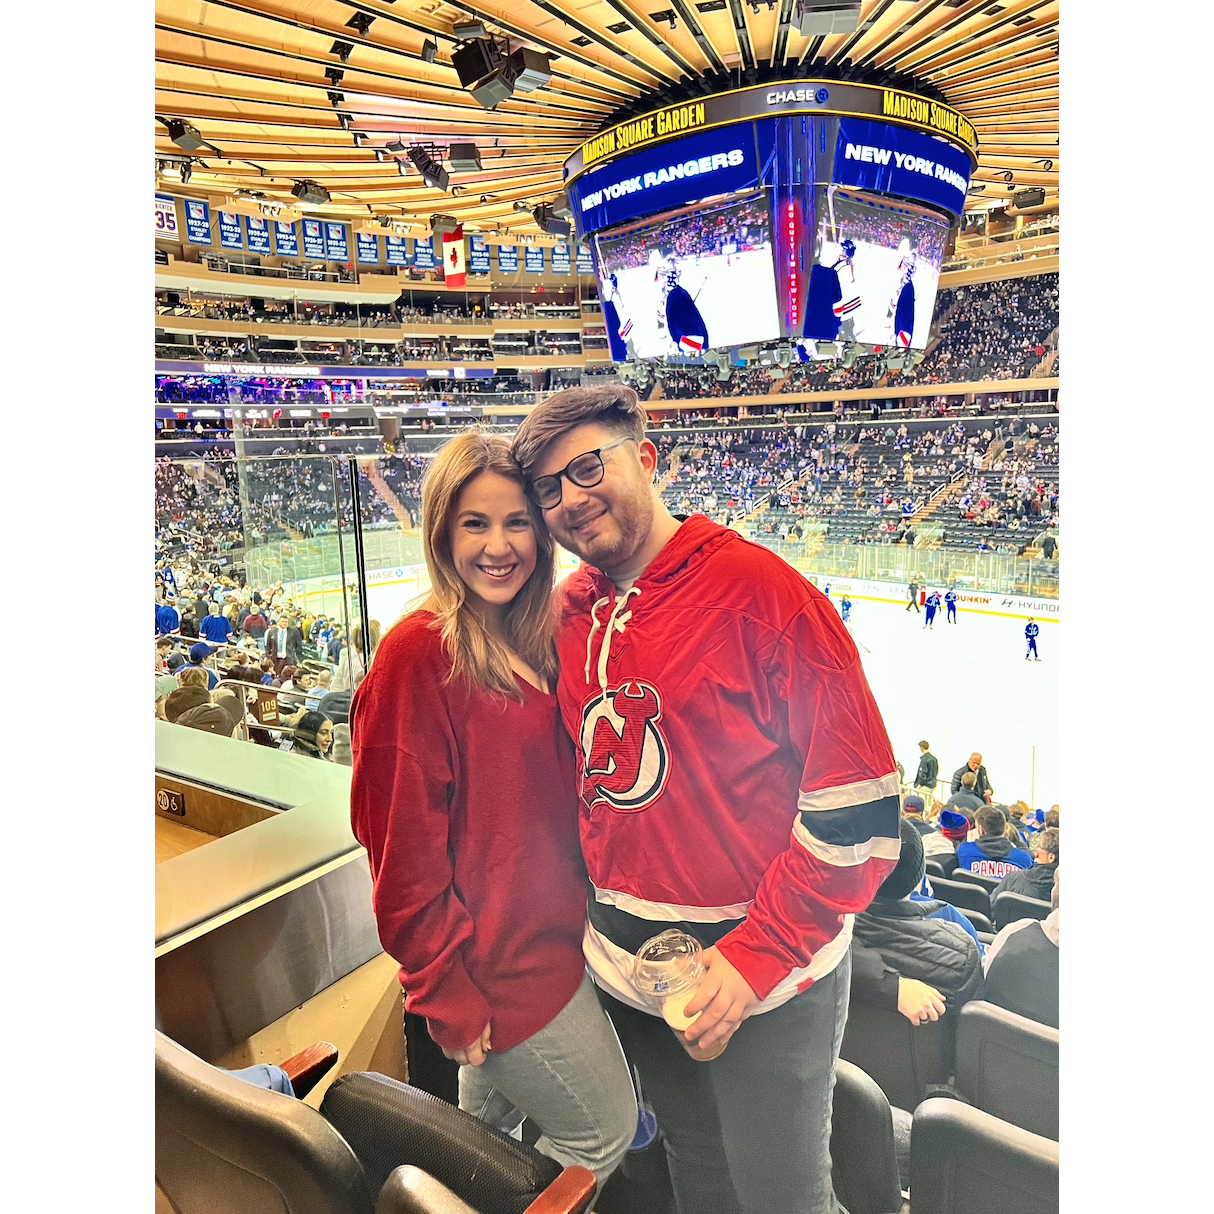 That night we got heckled for wearing Devils gear to MSG